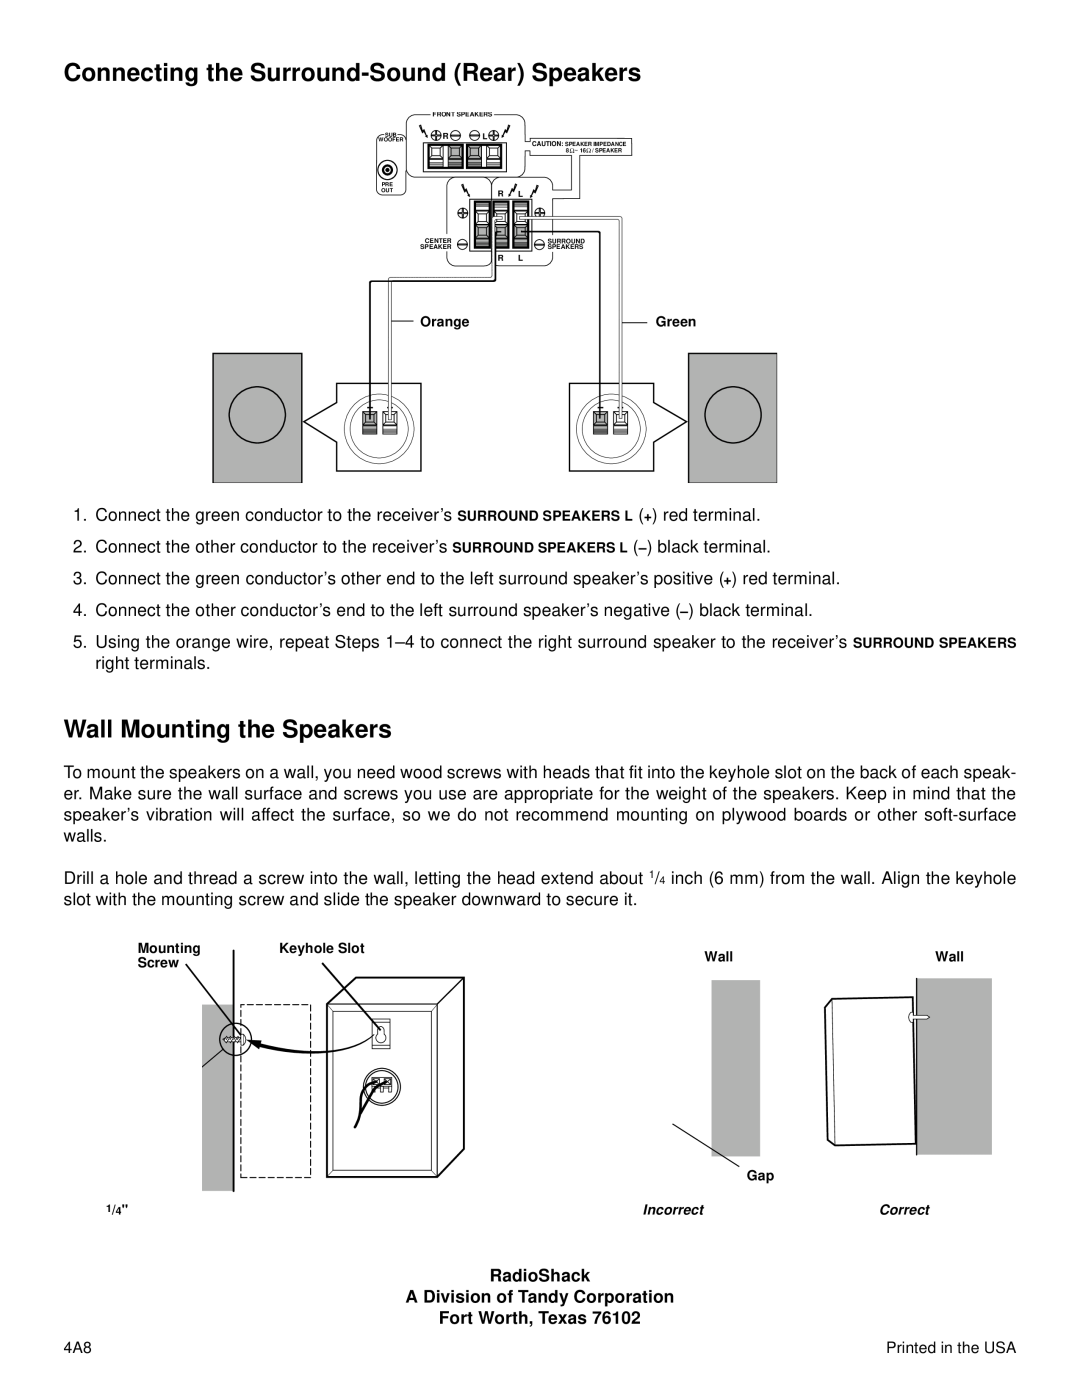 Optimus HTS-102 specifications Connecting the Surround-SoundRear Speakers, Wall Mounting the Speakers, Fort Worth, Texas 